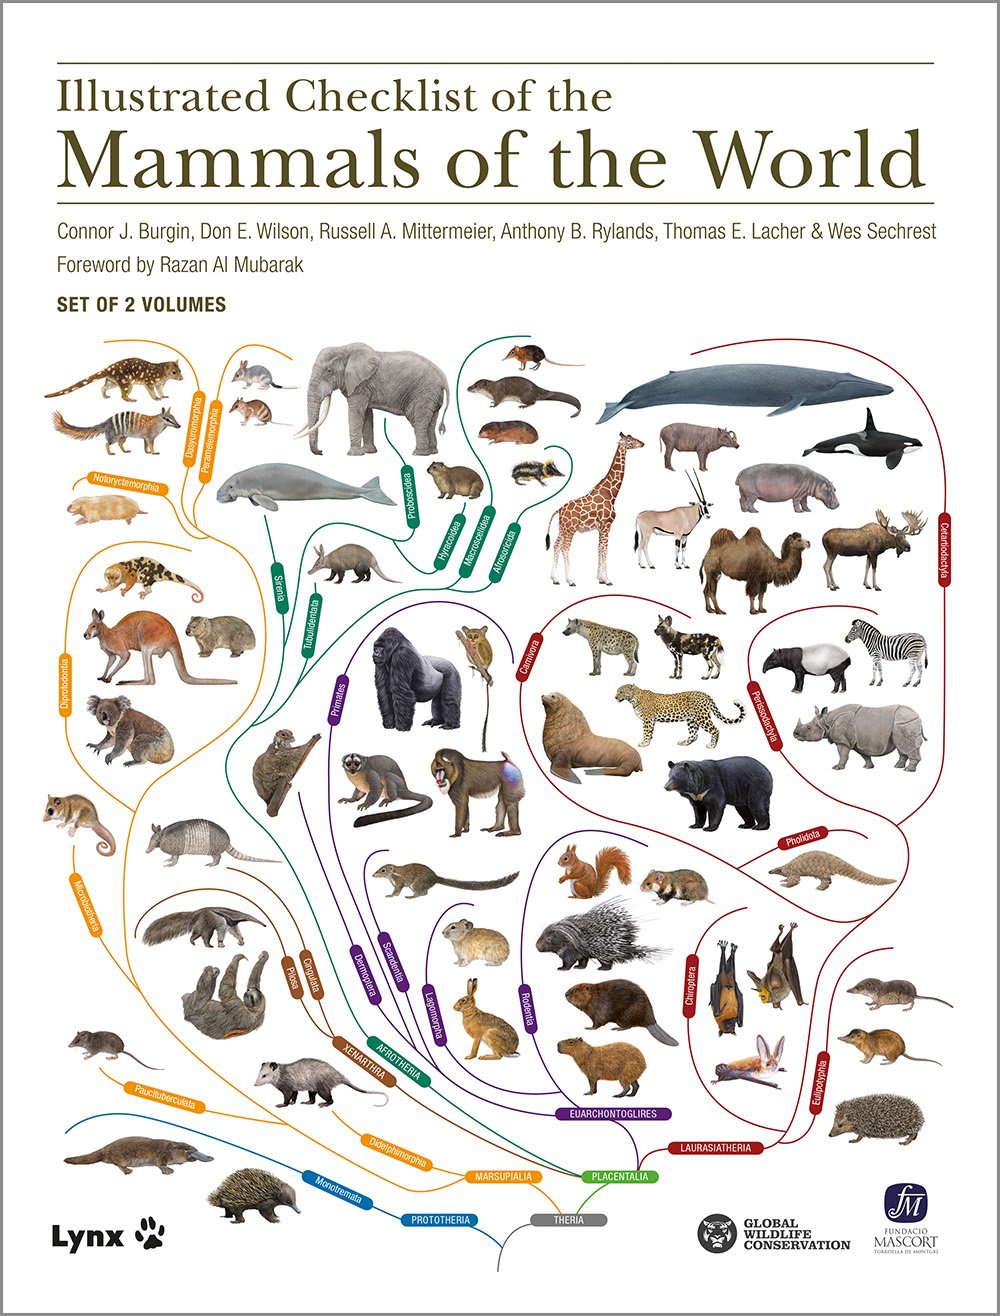 Illustrated Checklist of the Mammals of the World 1. kötet - Monotremata to Rodentia (Rippl-Rónai Múzeum CC BY-NC-ND)